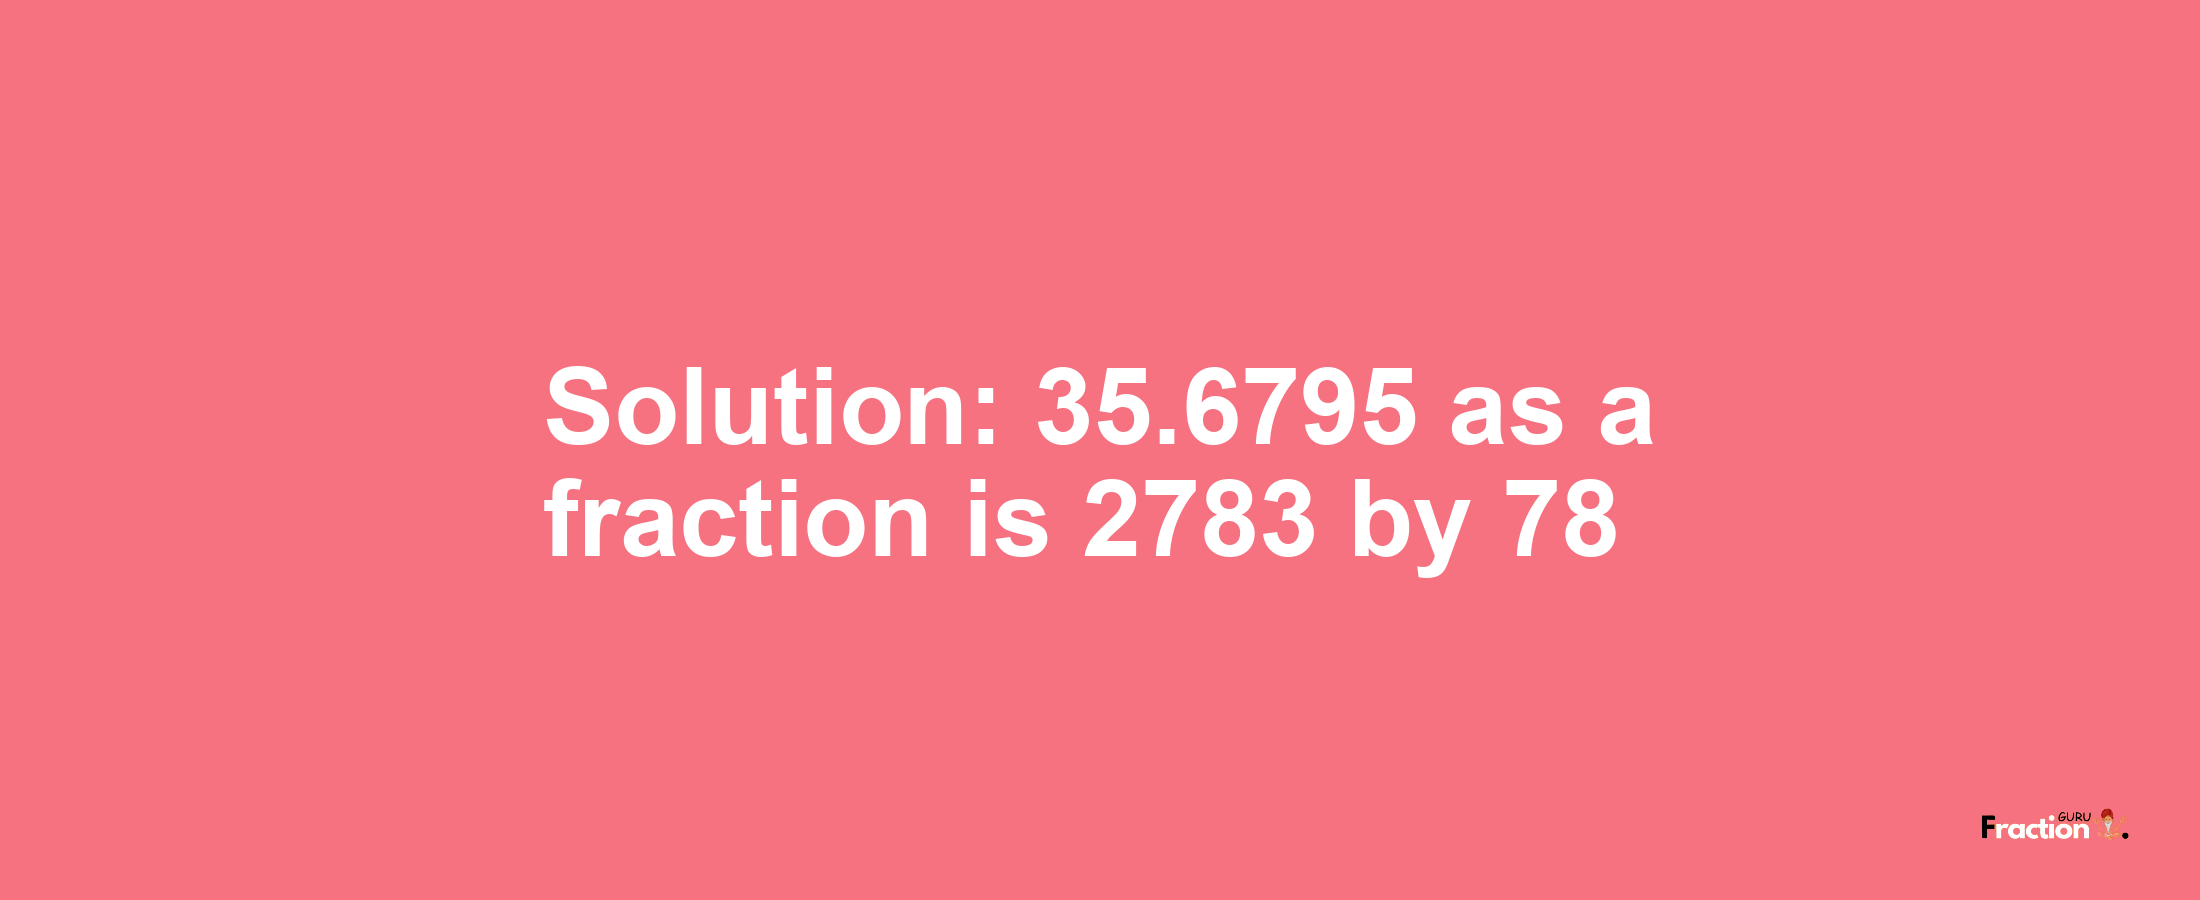 Solution:35.6795 as a fraction is 2783/78